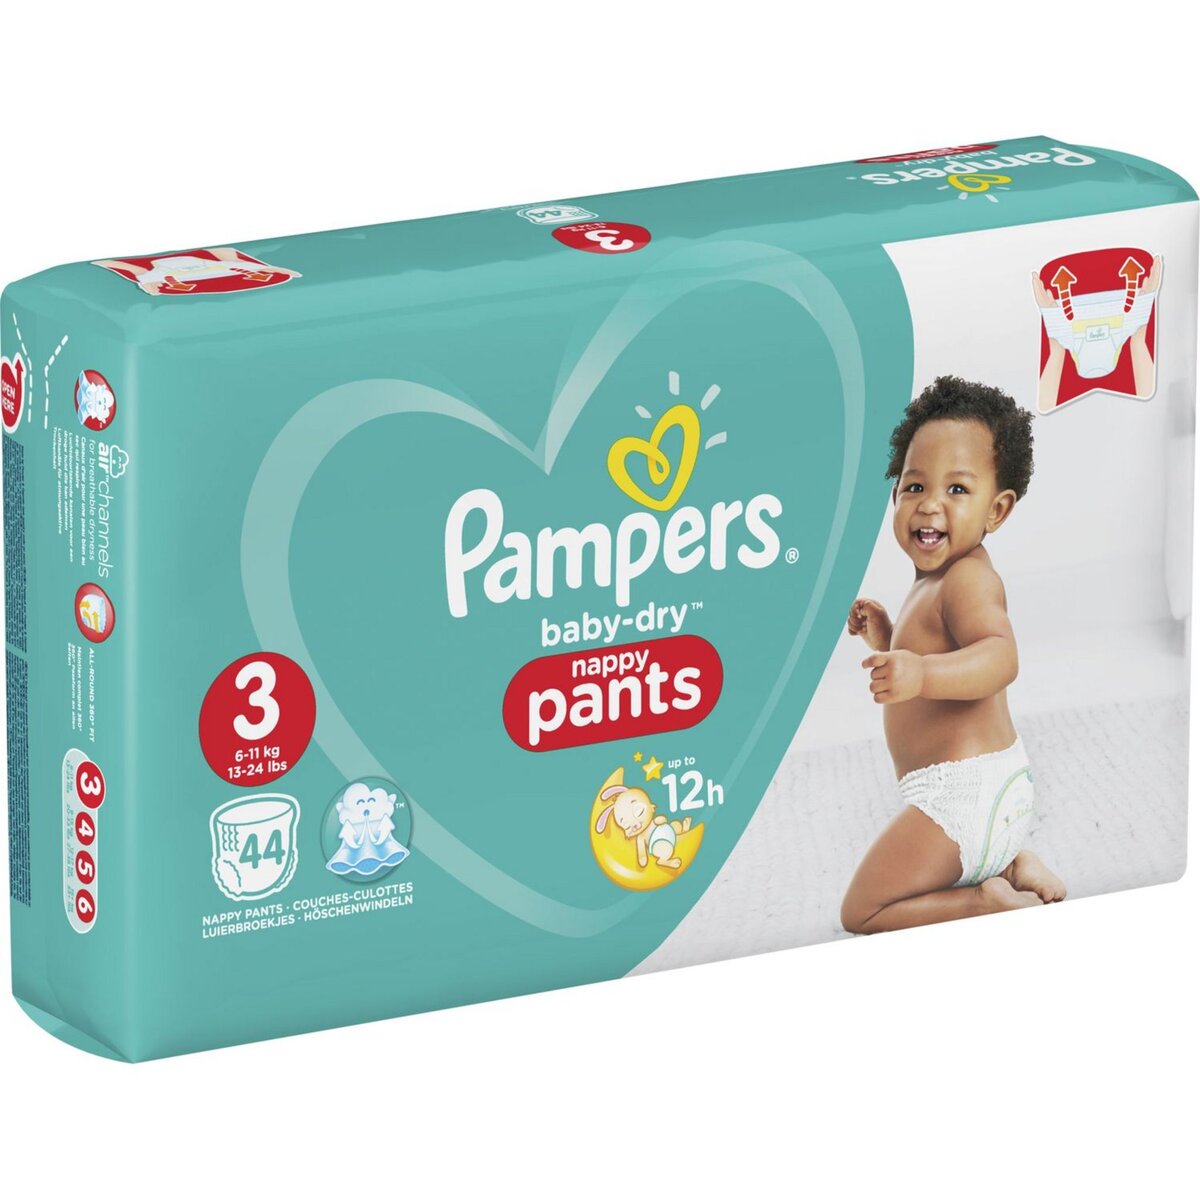 PAMPERS Baby-dry pants couches-culottes taille 3 (6-11kg) 44 couches